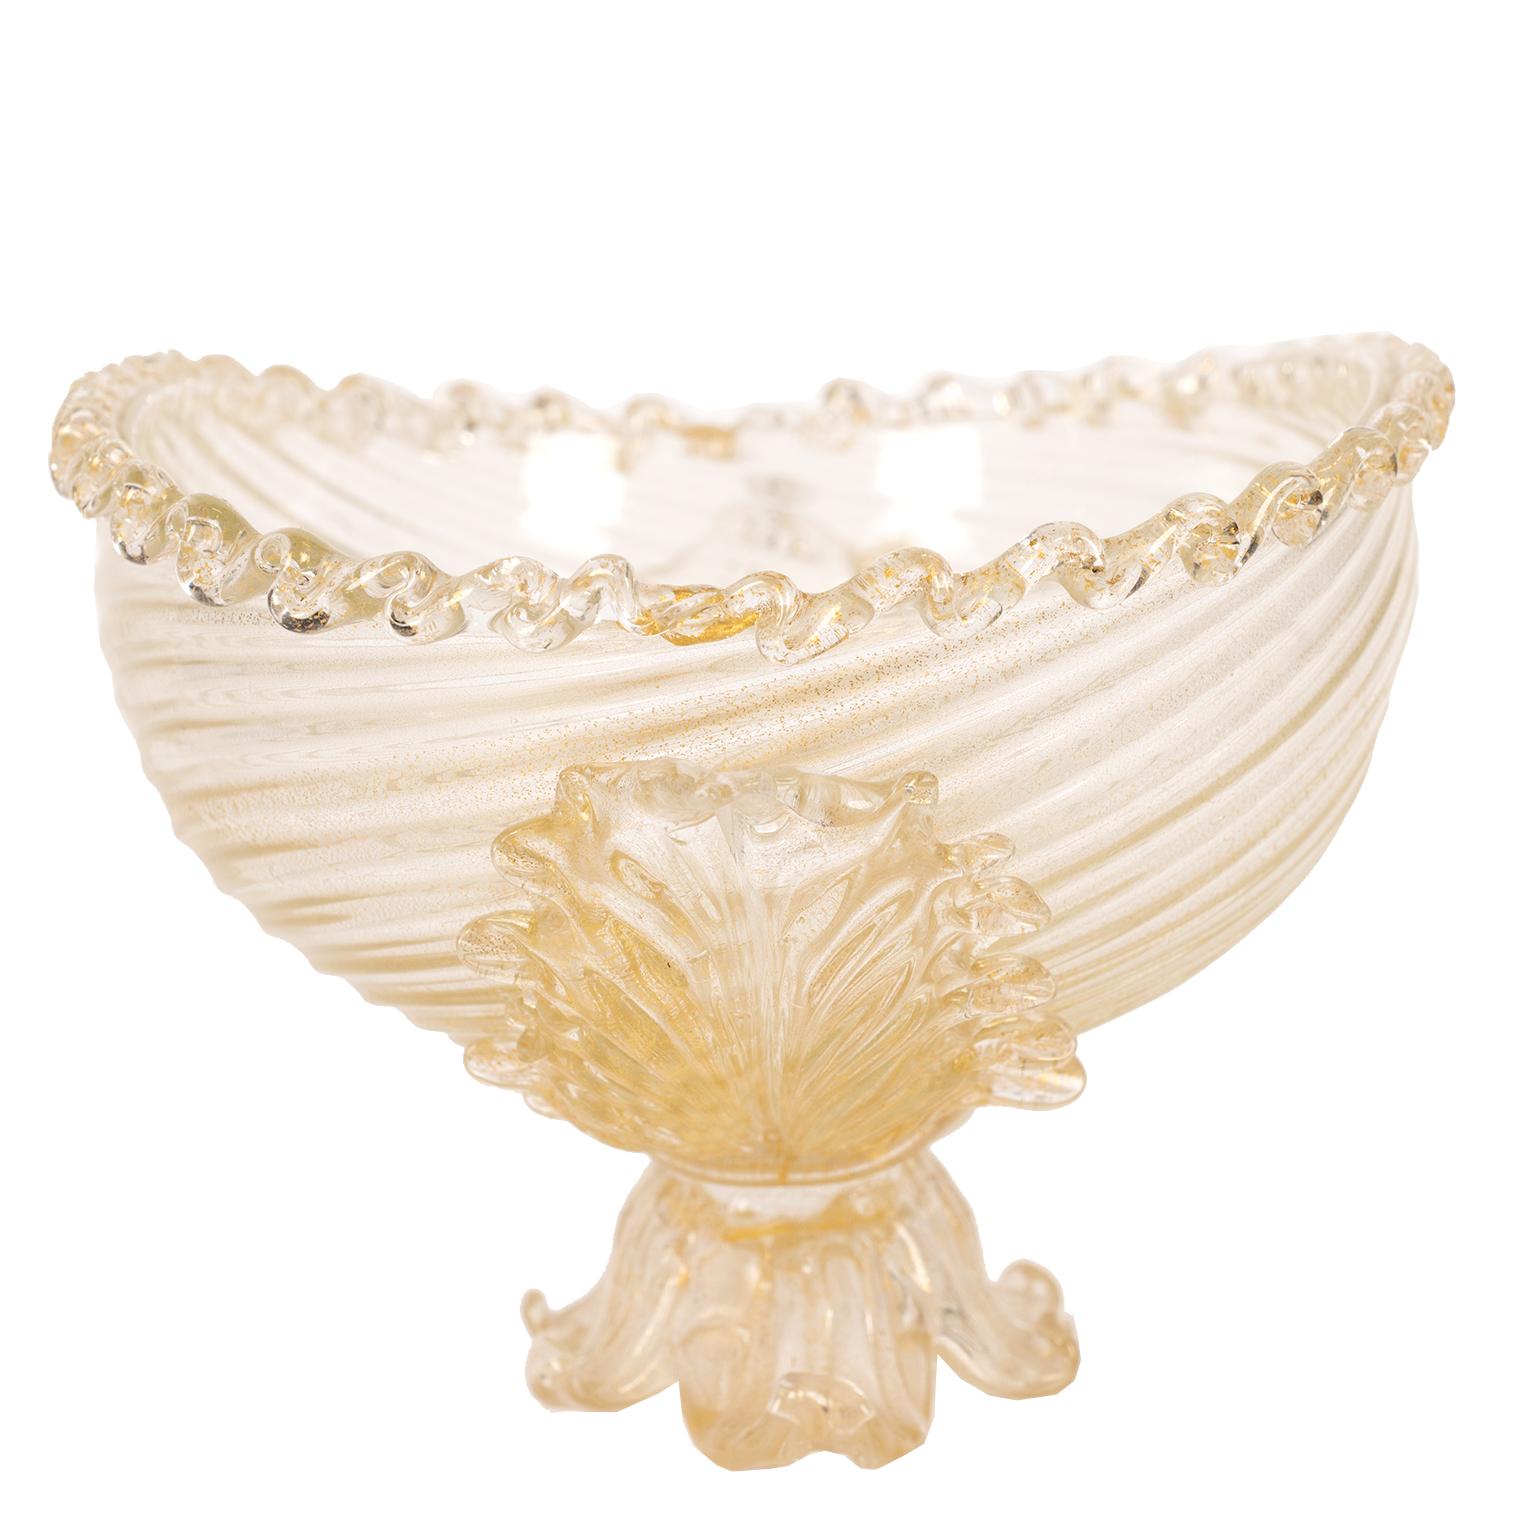 Hand-Crafted Barovier Toso Gold Glass Footed Bowl